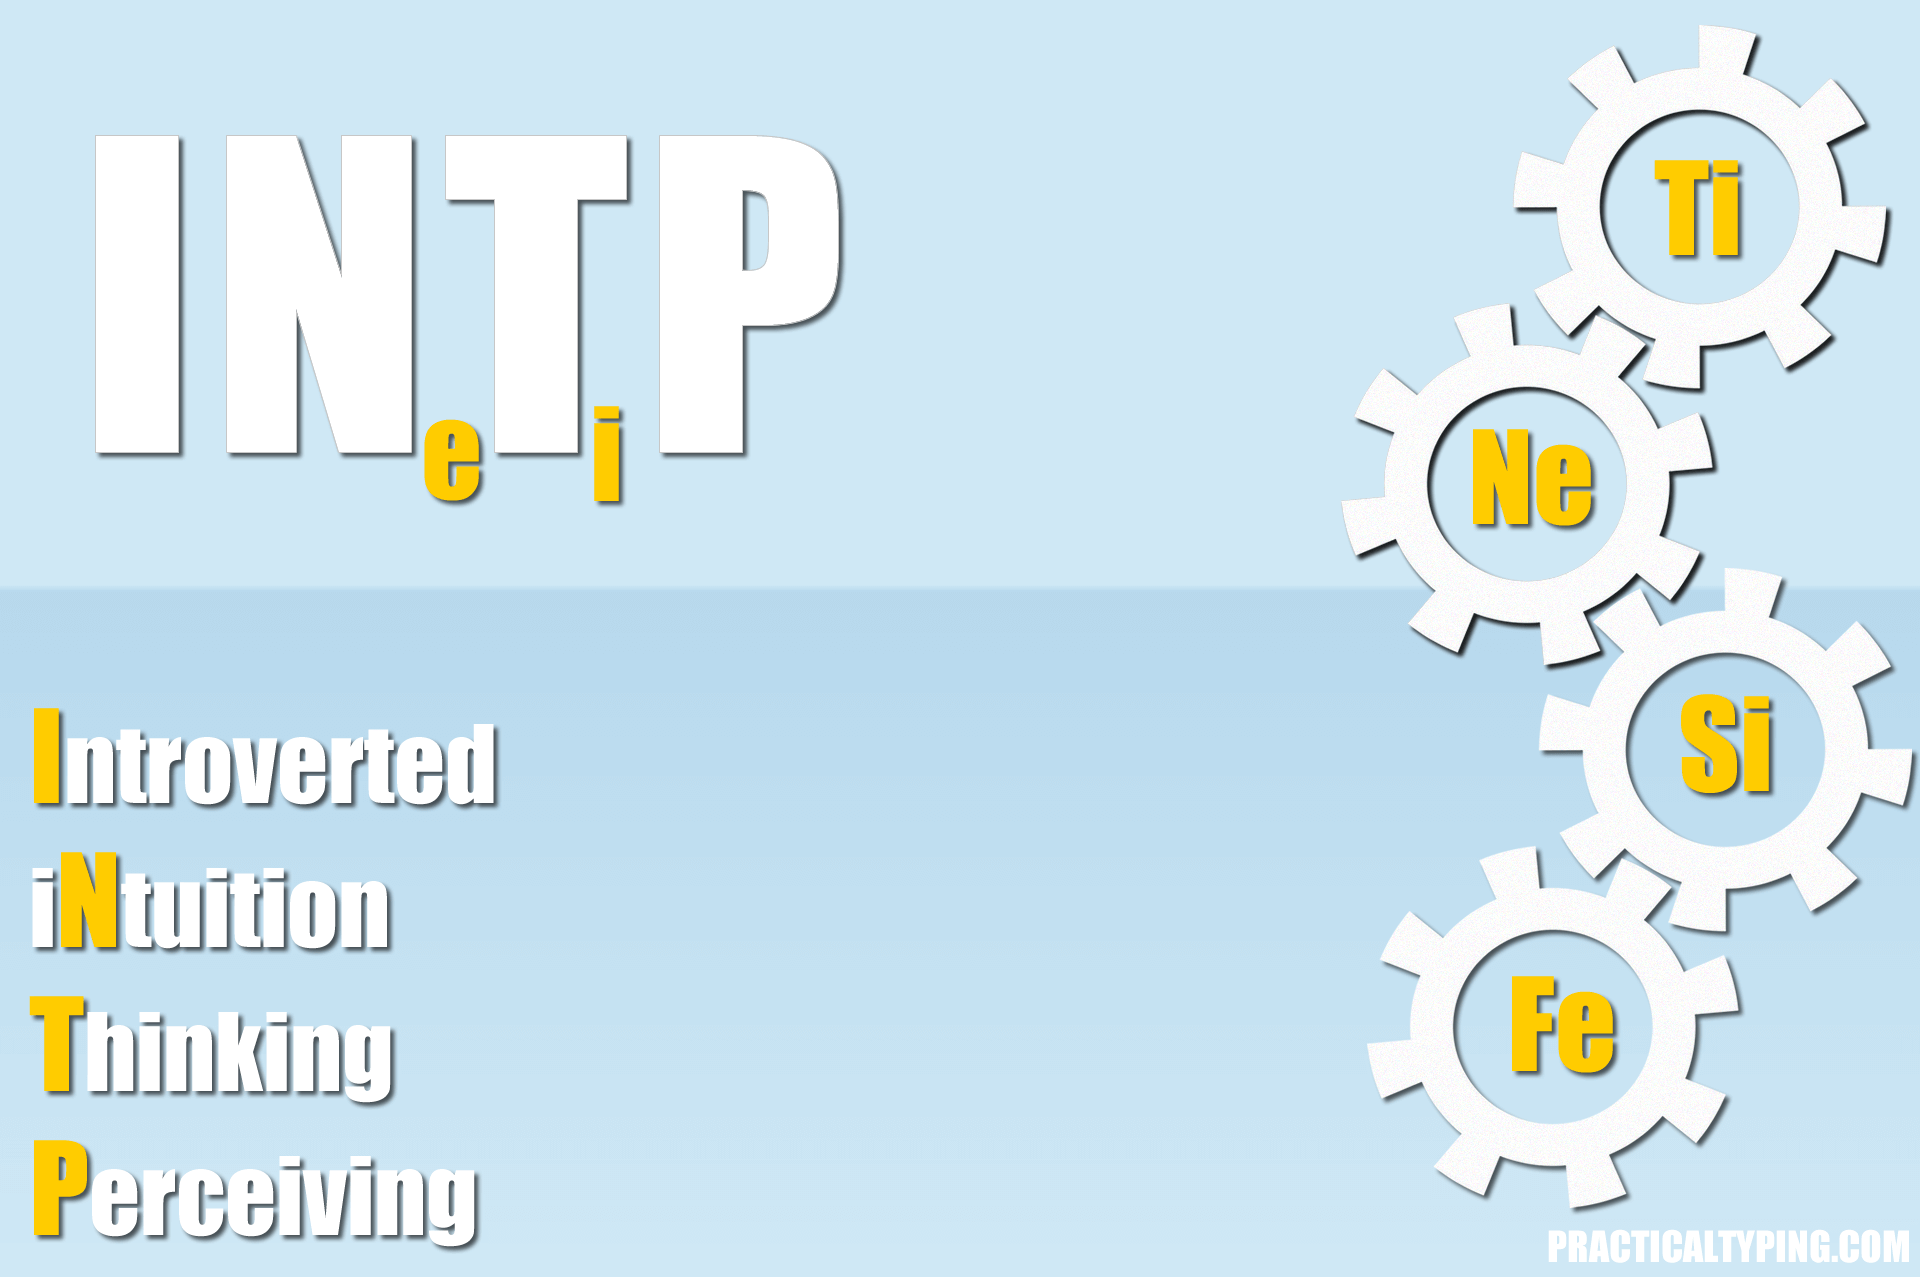 I did an MBTI test some years ago and got INTP as a result. After